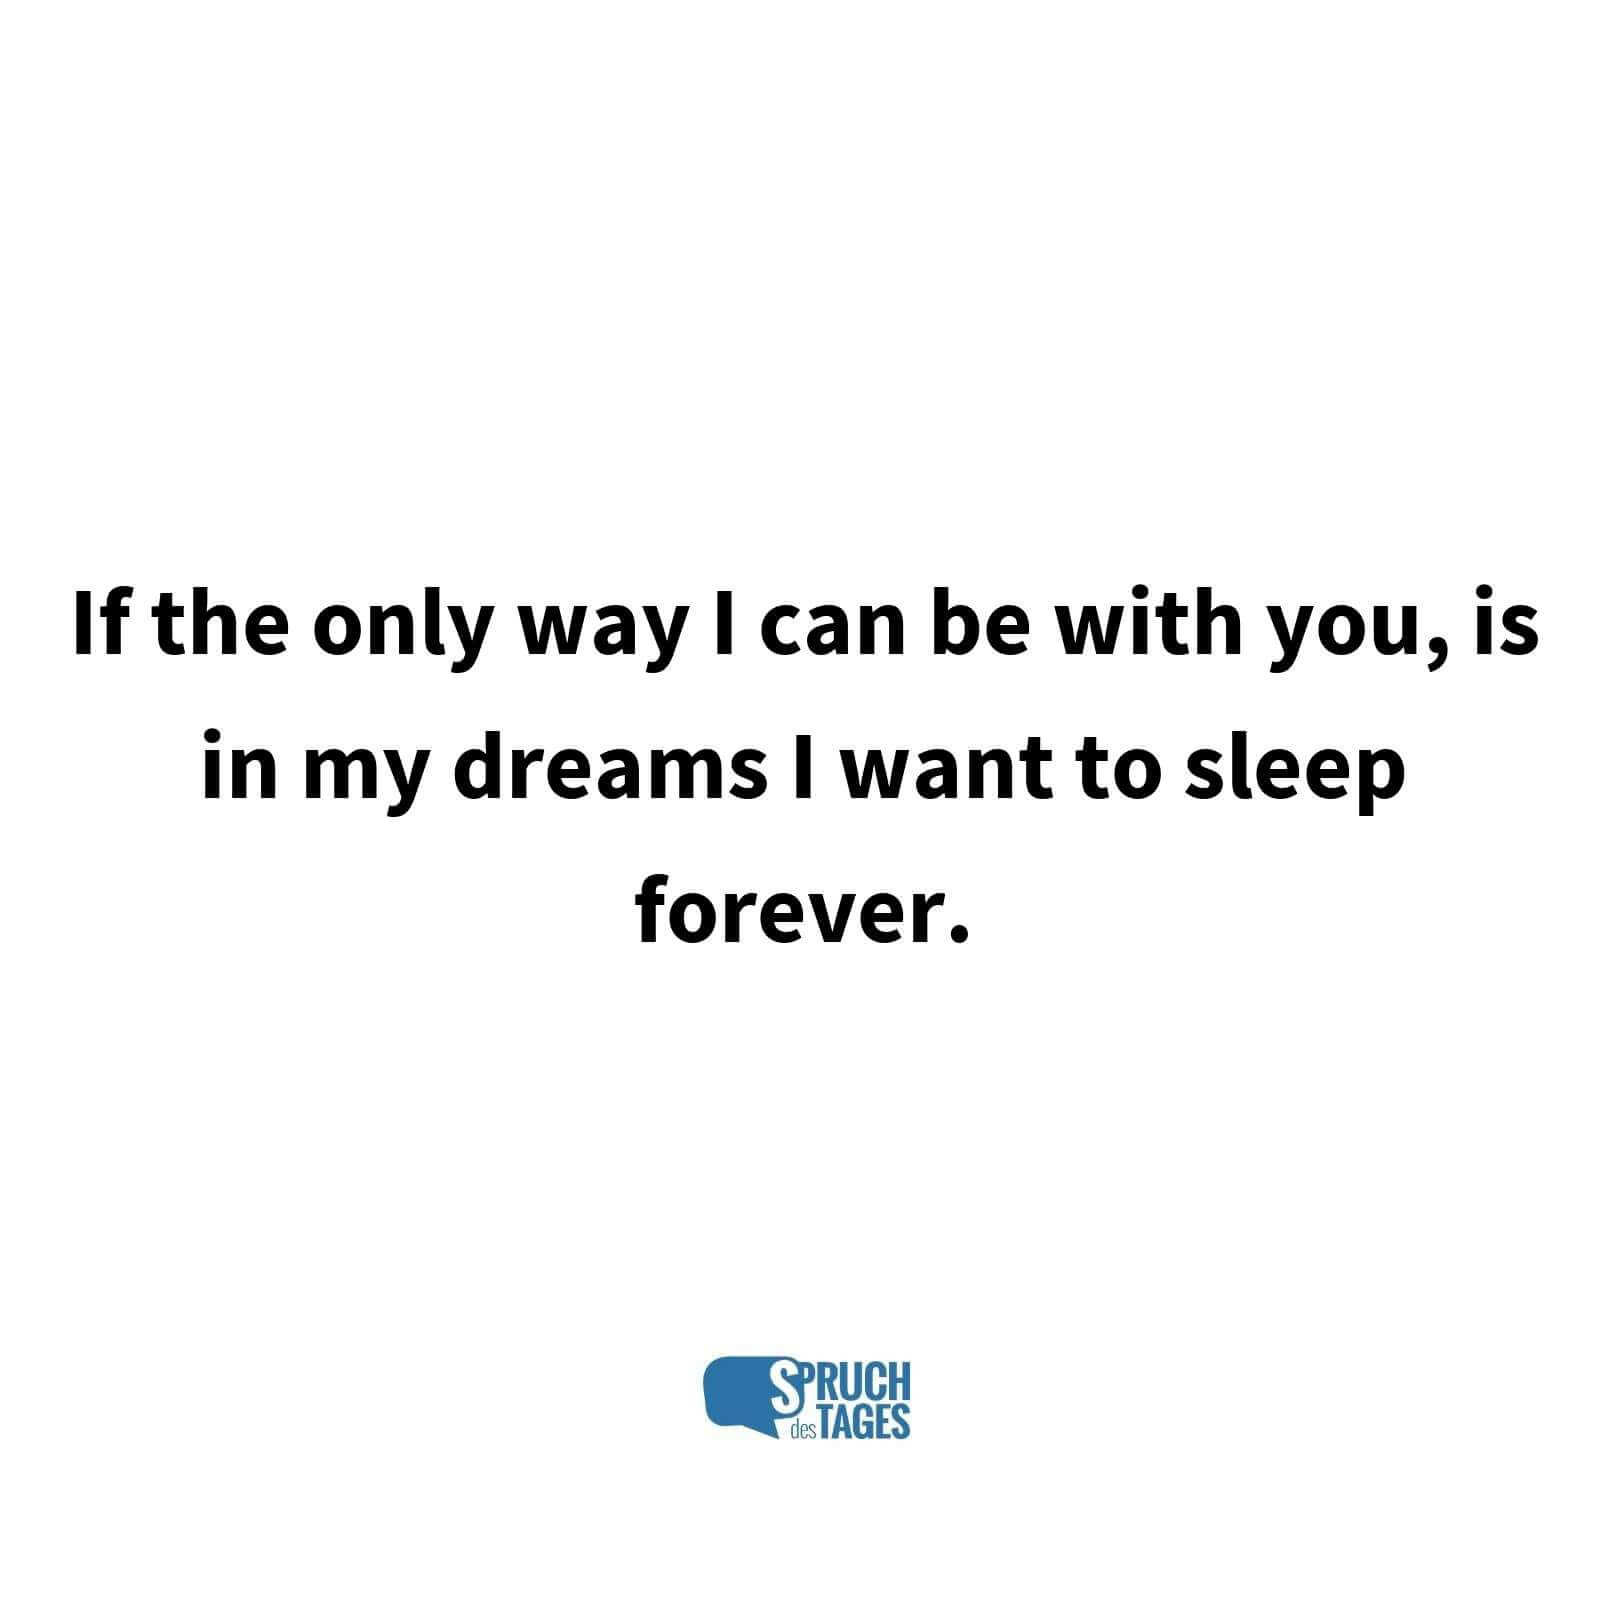 If the only way I can be with you, is in my dreams I want to sleep forever.